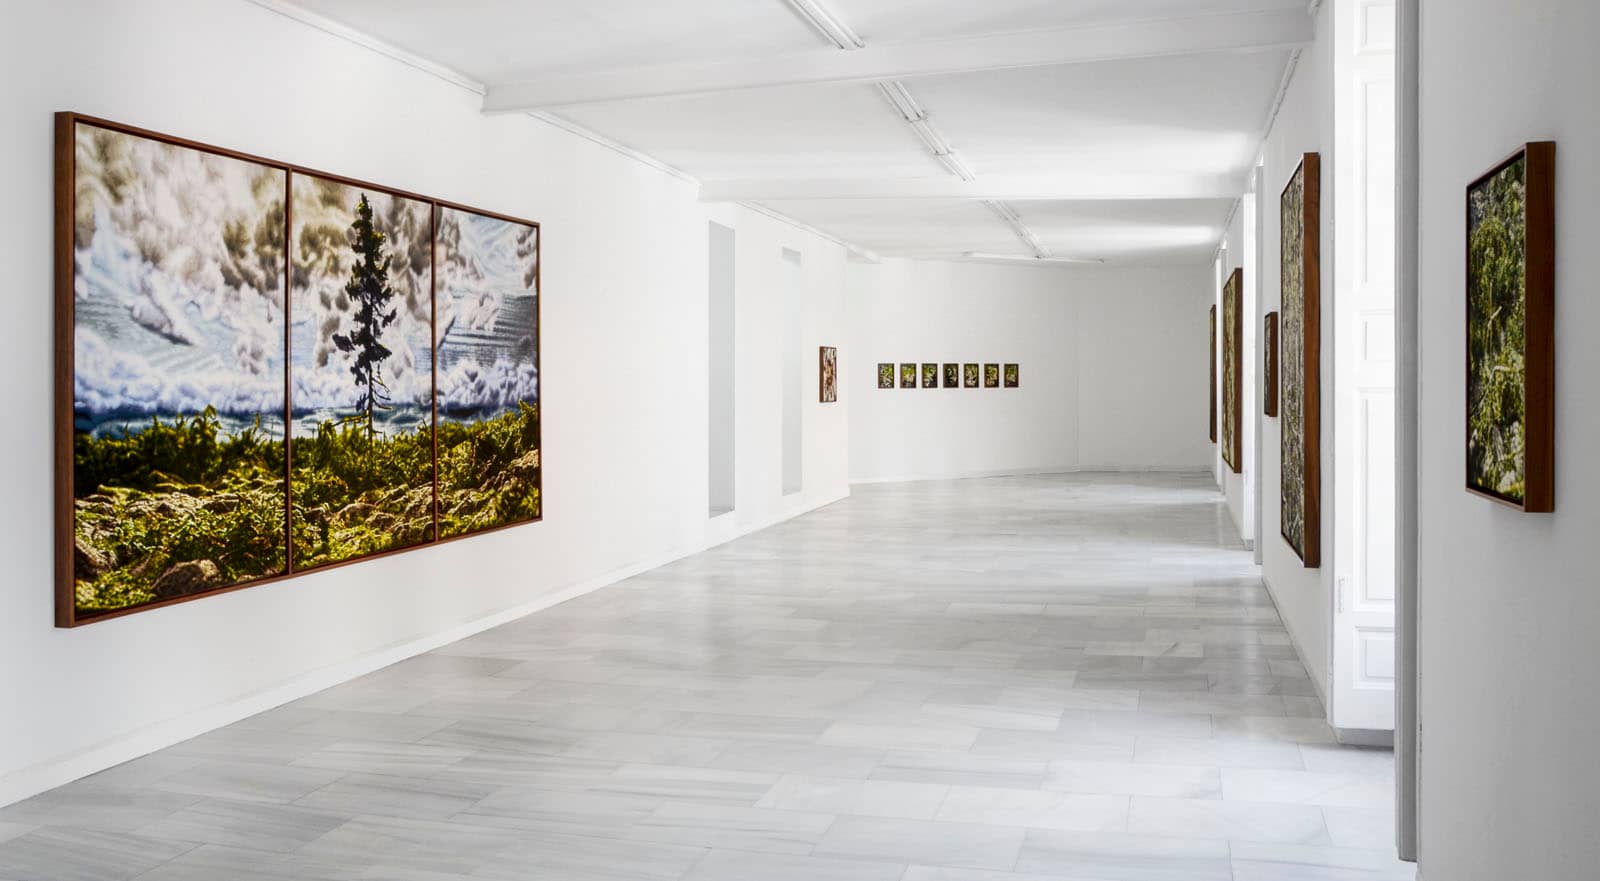 Exhibition view from Philipp Fröhlich's solo show "HOAP of a Tree" at Juana de Aizpuru gallery in Madrid. Various tempera paintings are seen hanging at the gallery space in Madrid.